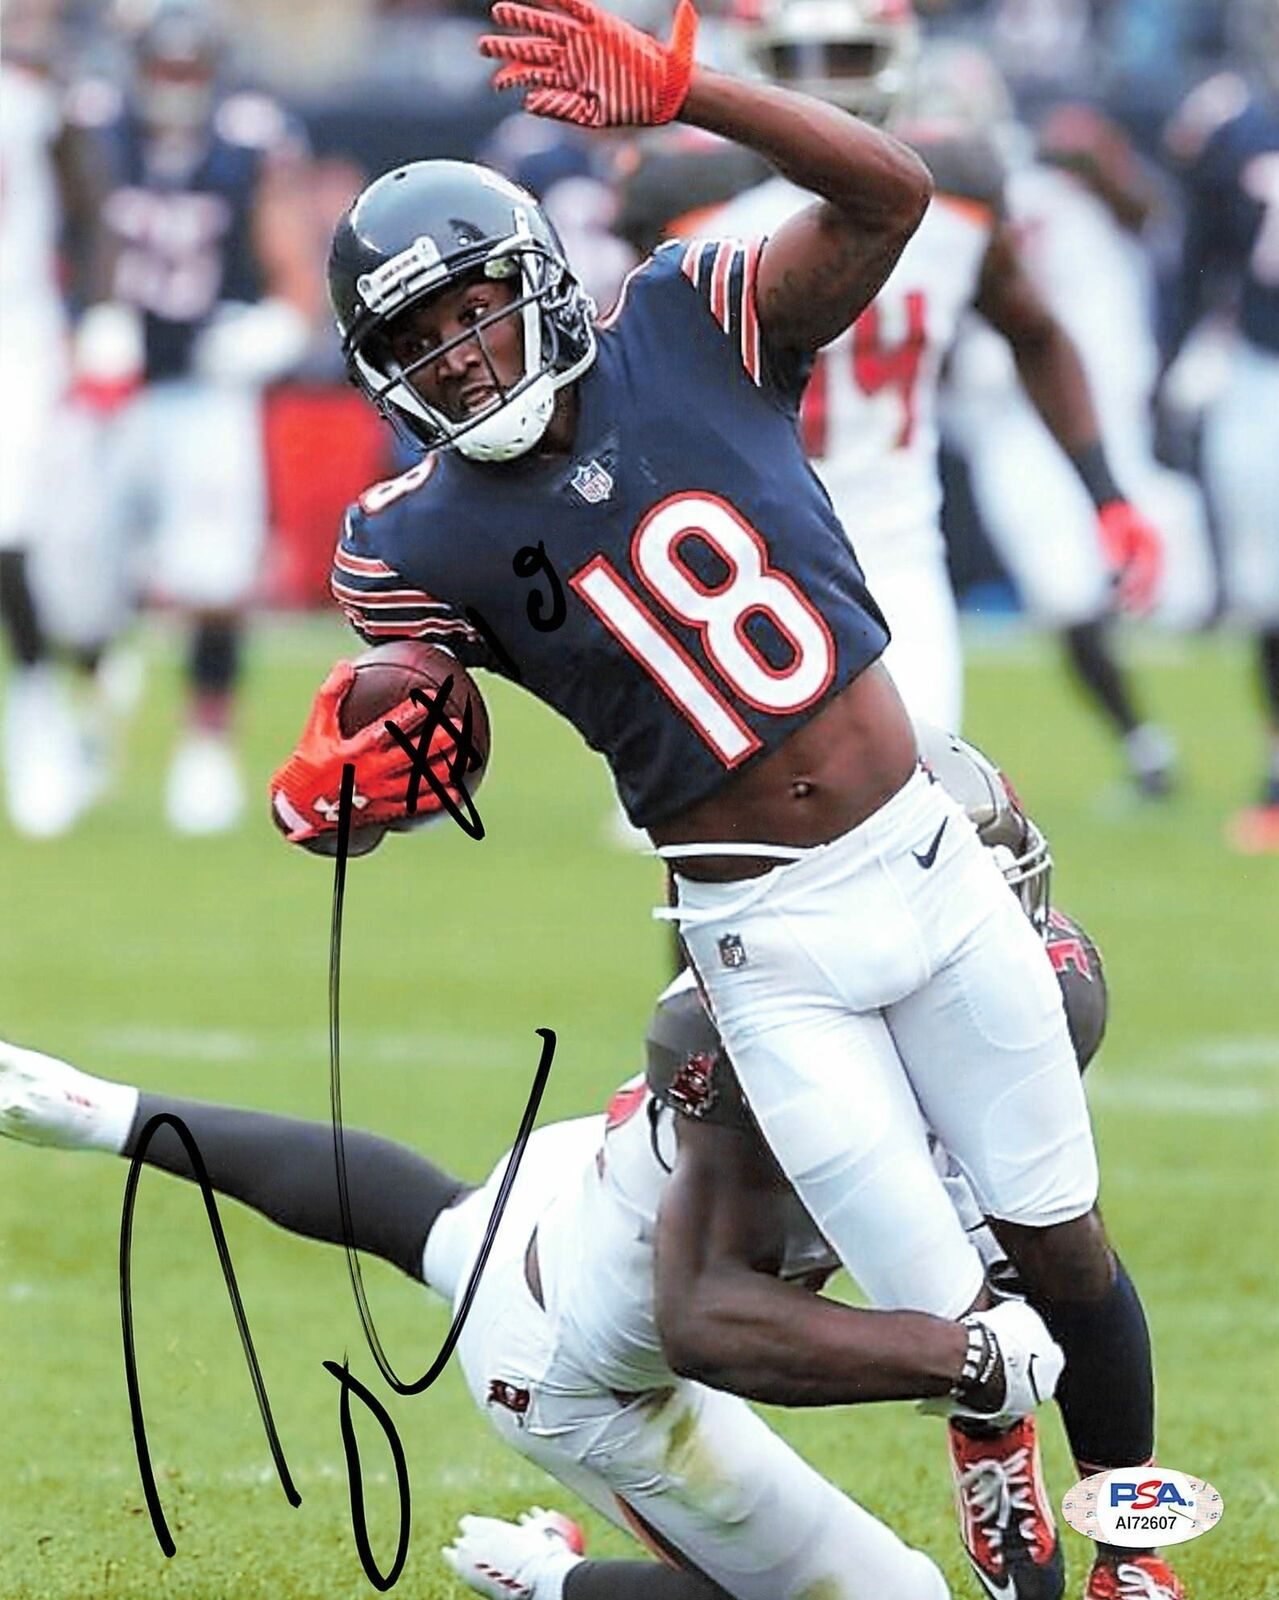 TAYLOR GABRIEL SIGNED 8×10 PHOTO PSA/DNA CHICAGO BEARS AUTOGRAPHED COLLECTIBLE MEMORABILIA